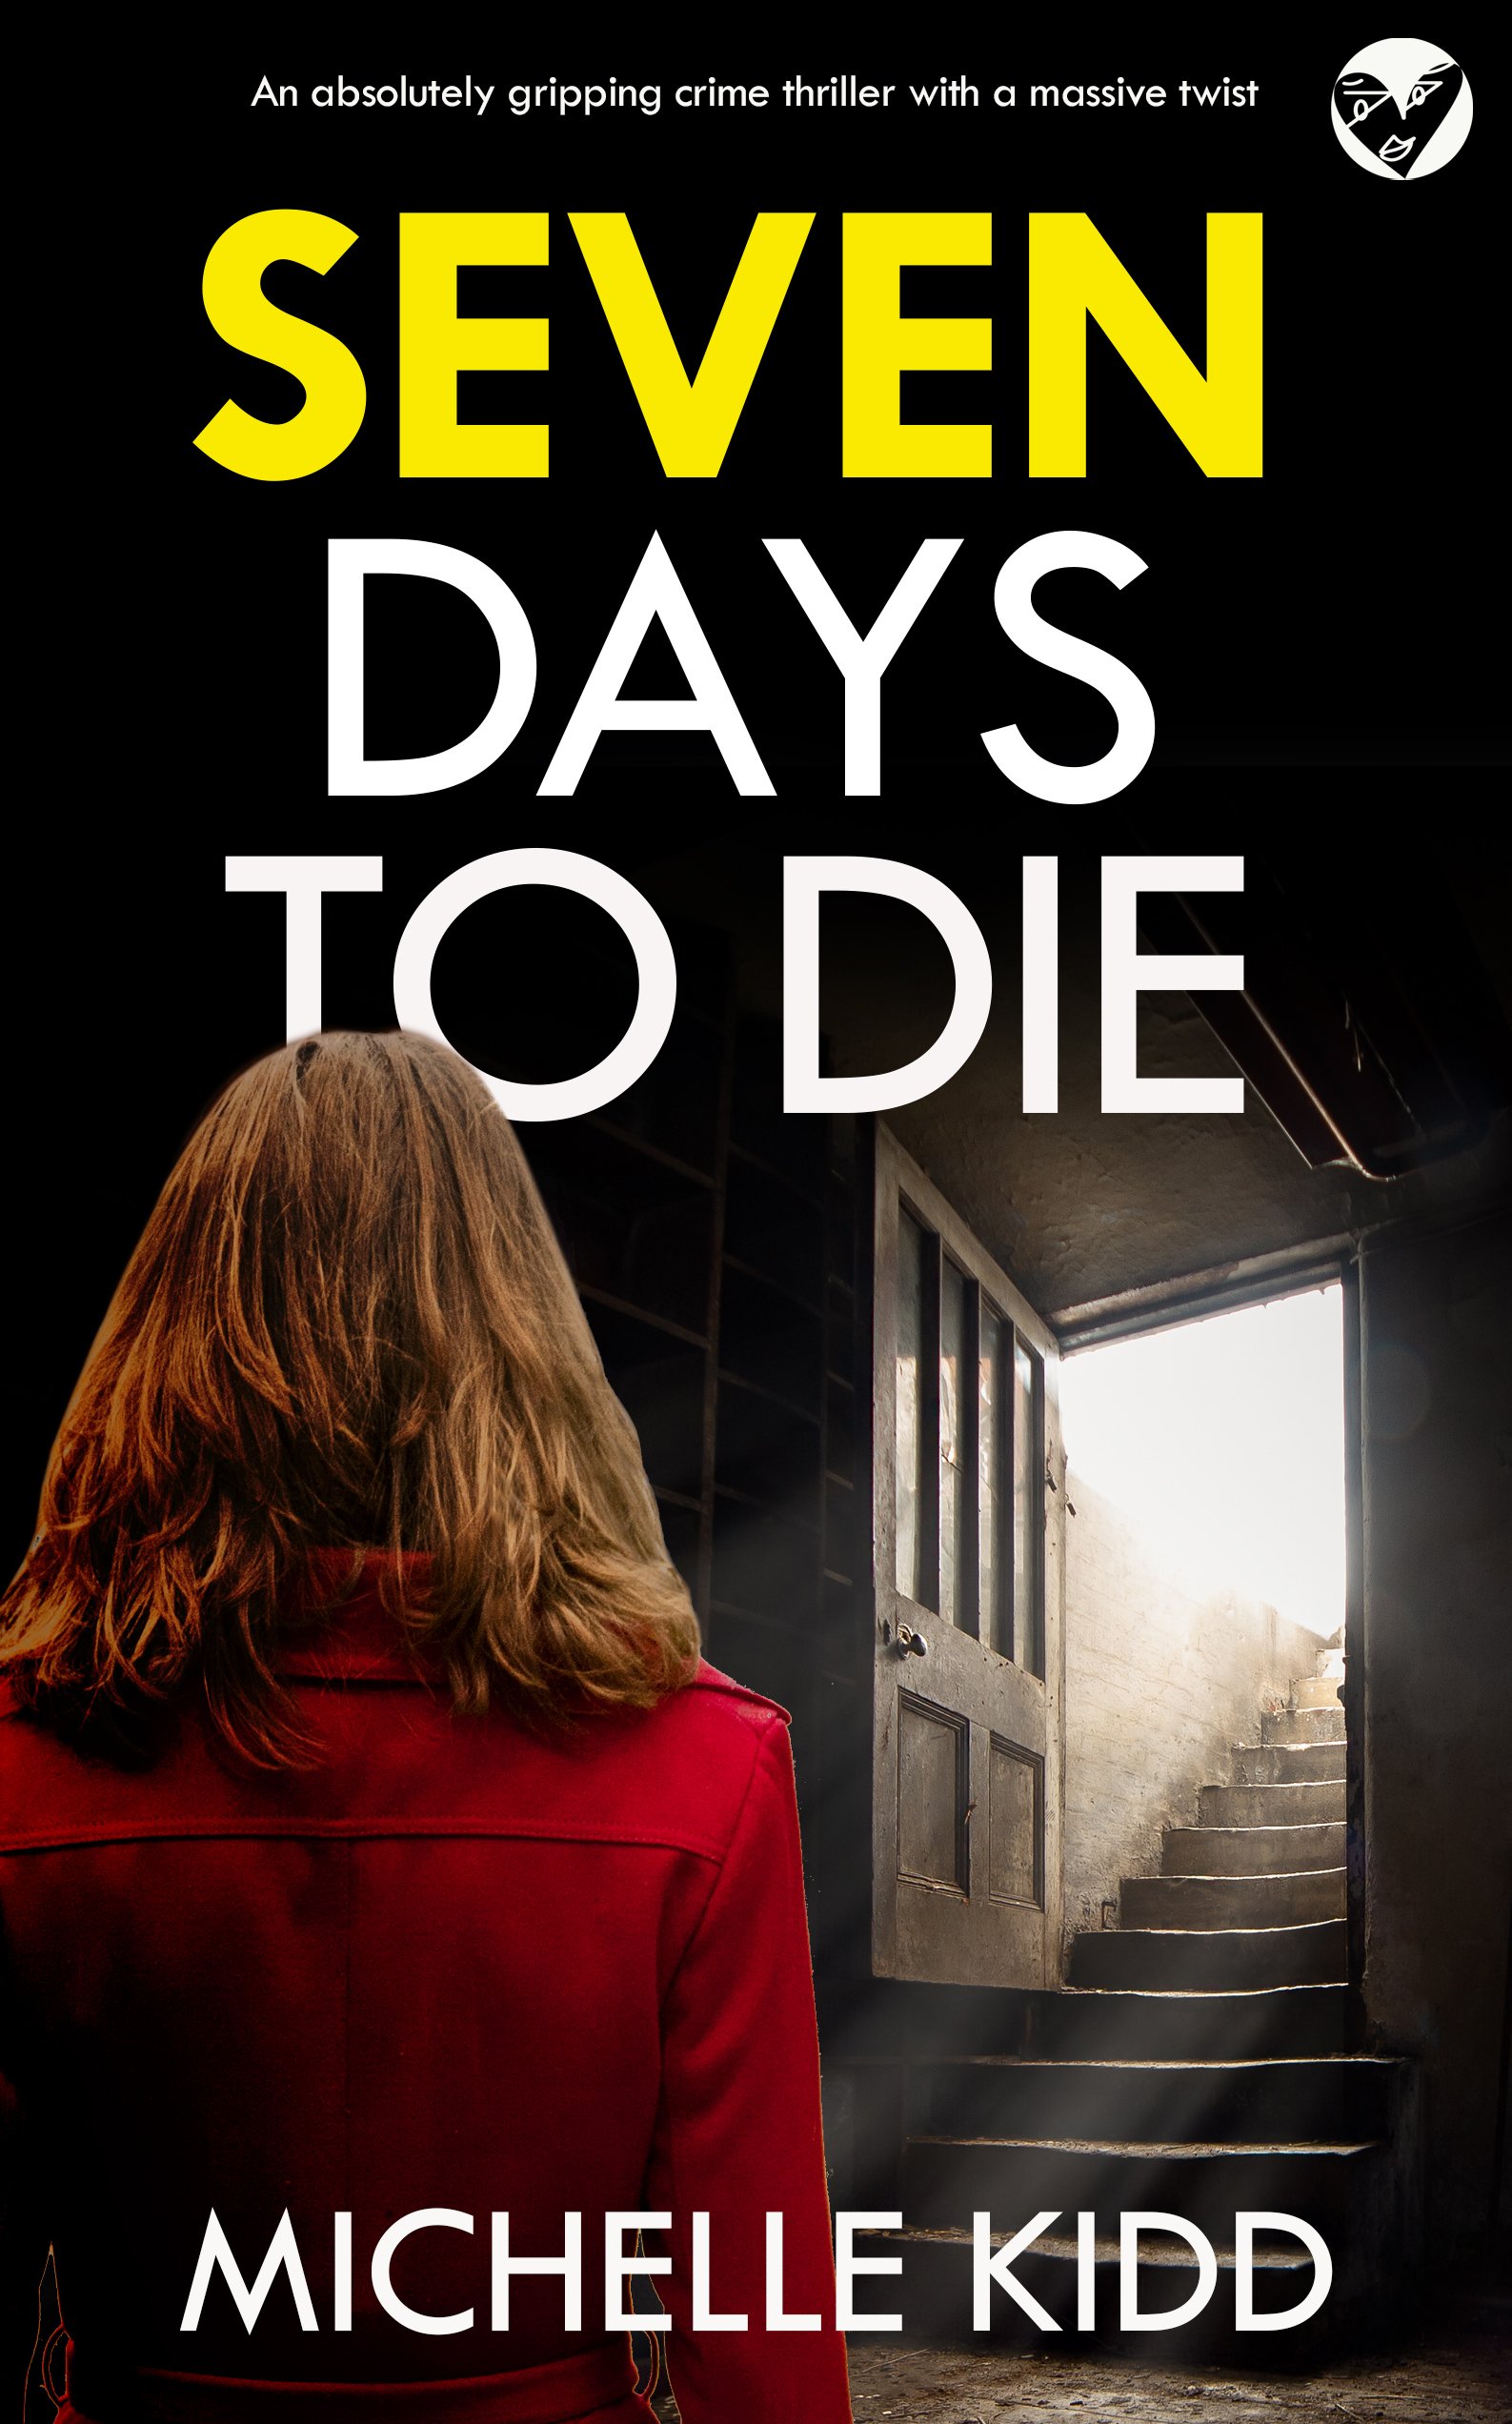 SEVEN DAYS TO DIE Cover publish (1).jpg